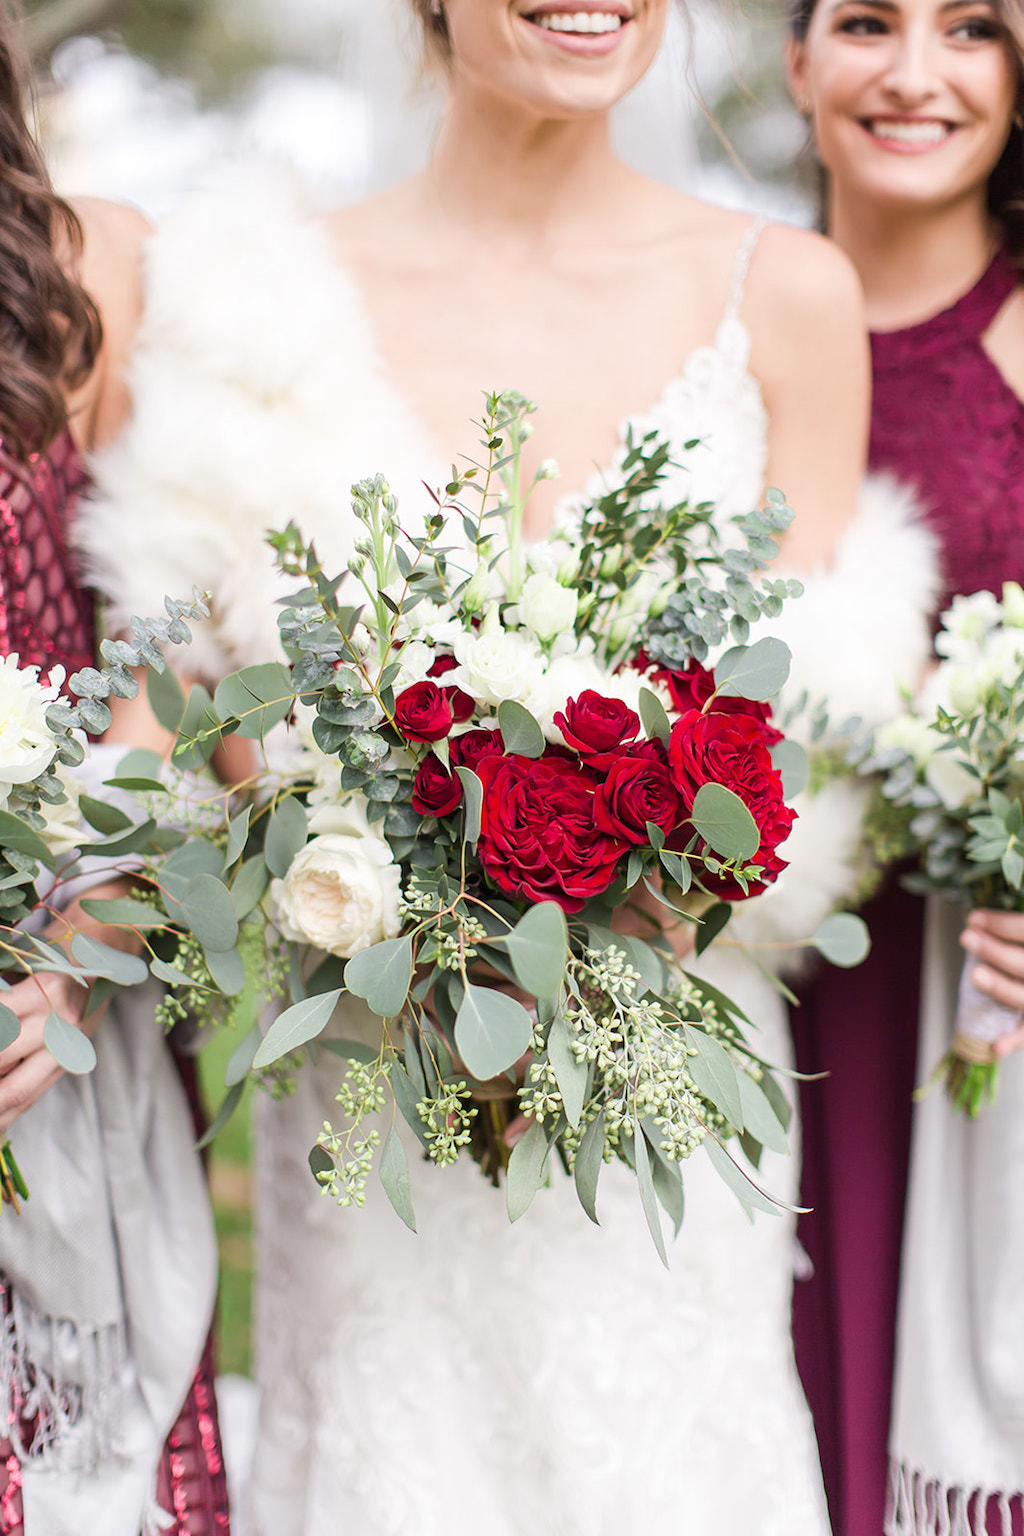 Christmas Inspired Bridal Bouquet, Rustic Chic White Roses, Deep Red Florals, Textured Greenery | Florida Luxury Wedding Photographers Shauna and Jordon Photography